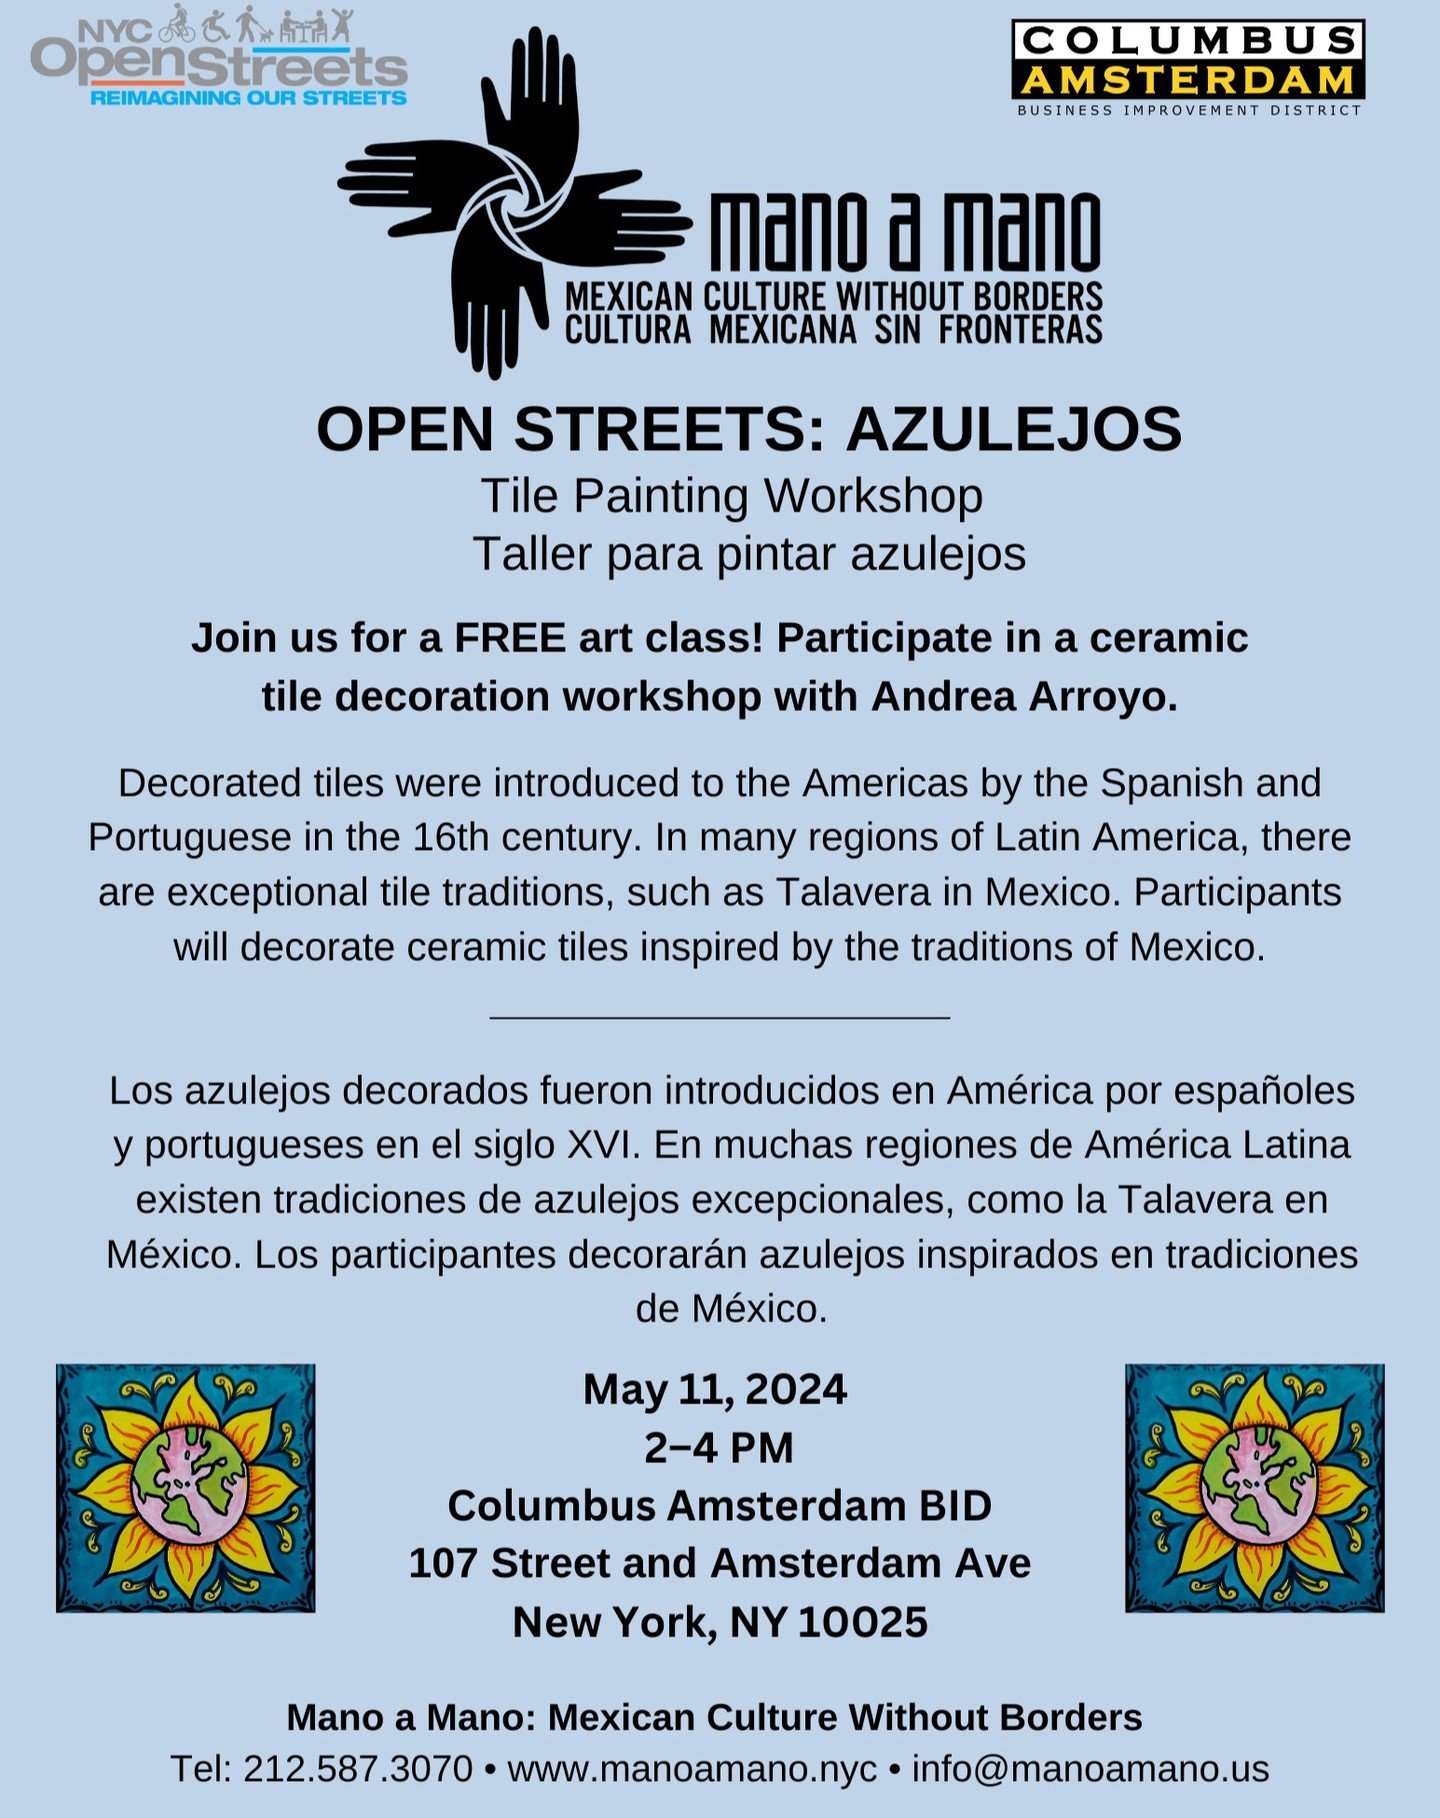 Our longtime neighborhood partner, Mano a Mano, is hosting a Mexican tile painting workshop this Saturday from 2-4 PM at 107th St and Amsterdam! We hope you will stop by to learn more about this rich artistic tradition and try your hand at decorating